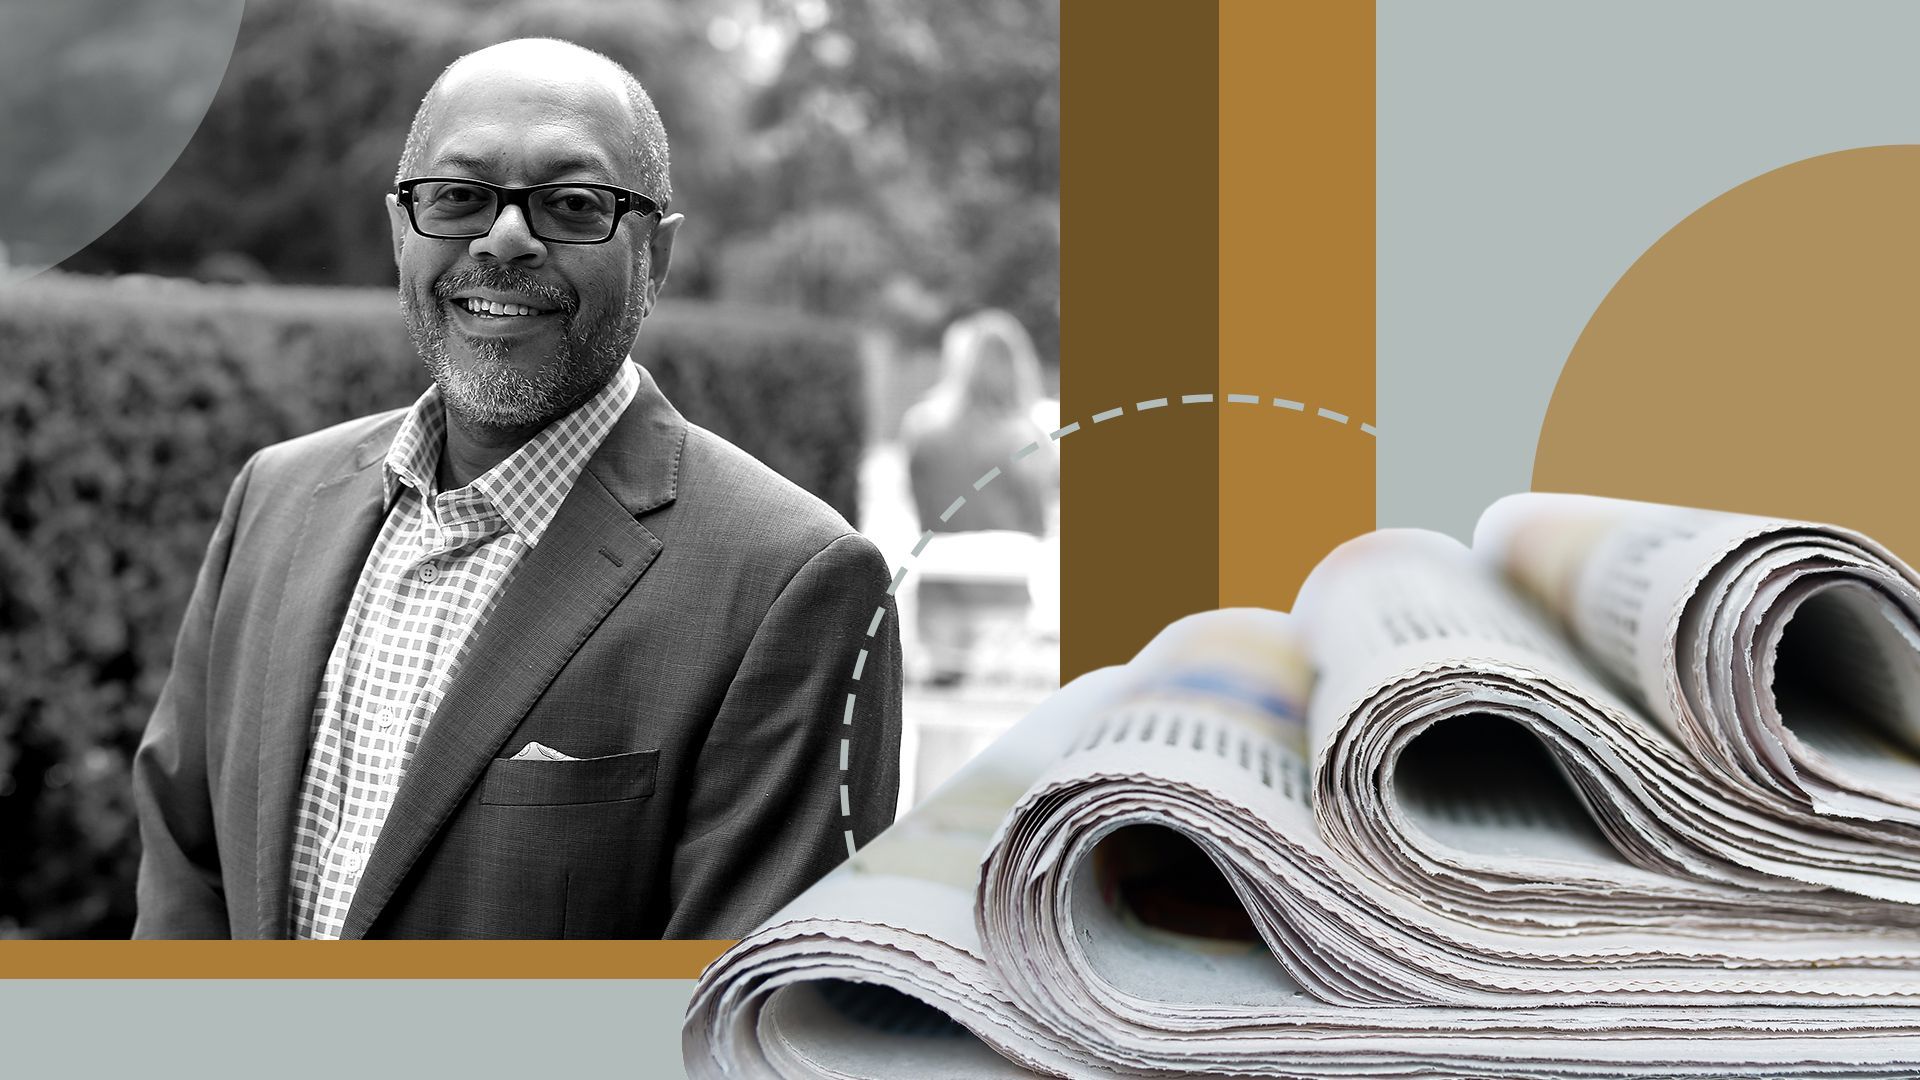 Photo illustration of Kevin Merida, LA Times editor, next to a large stack of newspapers, and surrounded by graphic shapes